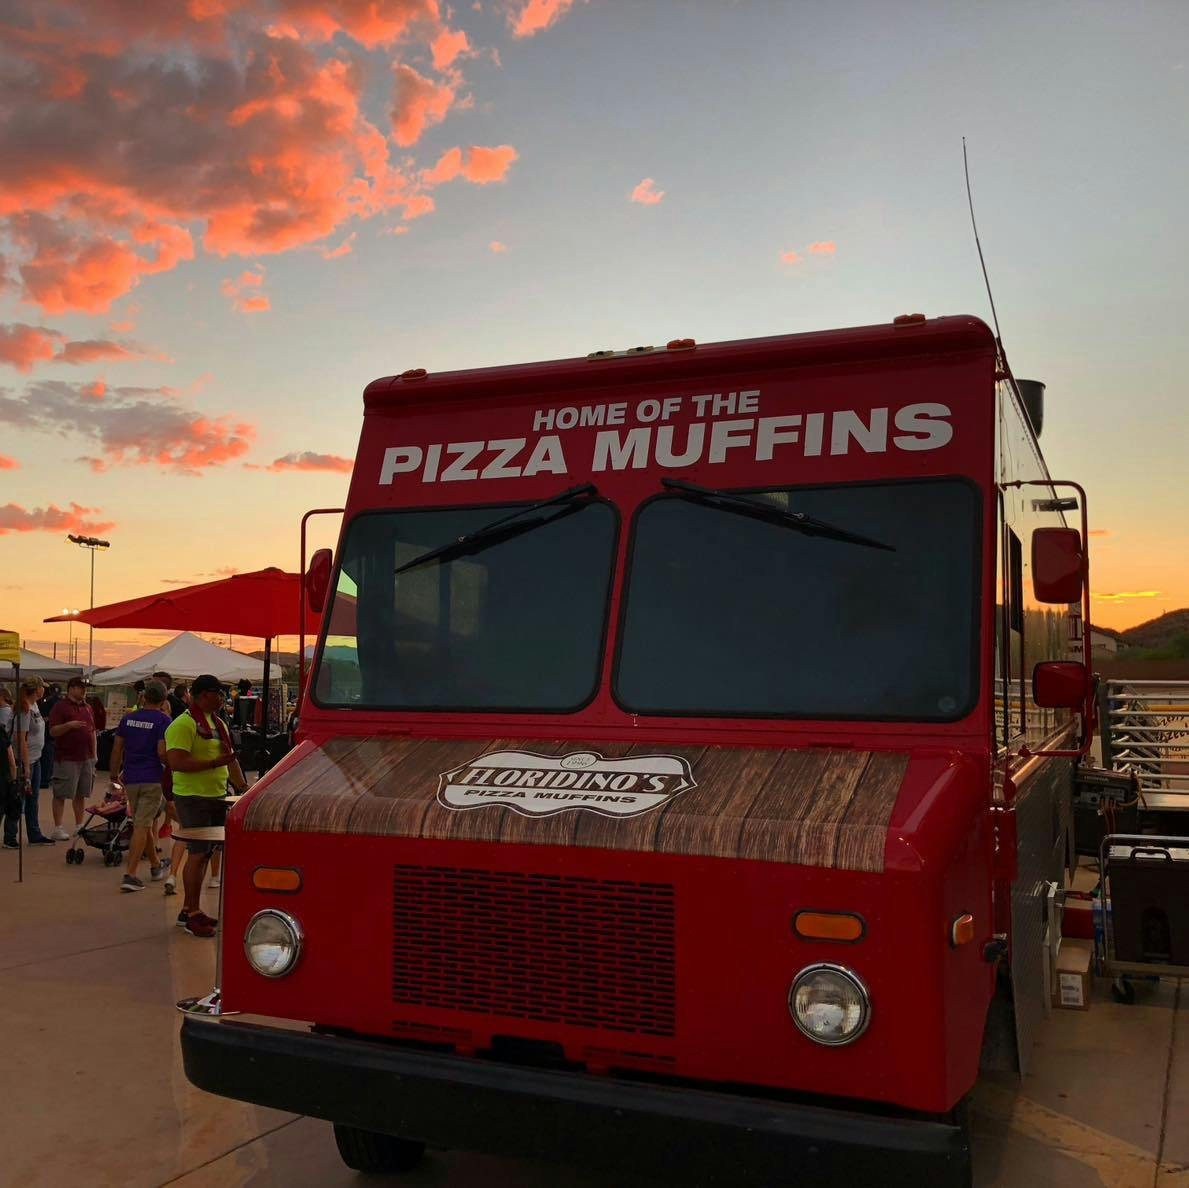 Image of Floridino's "Pizza Muffin" food truck